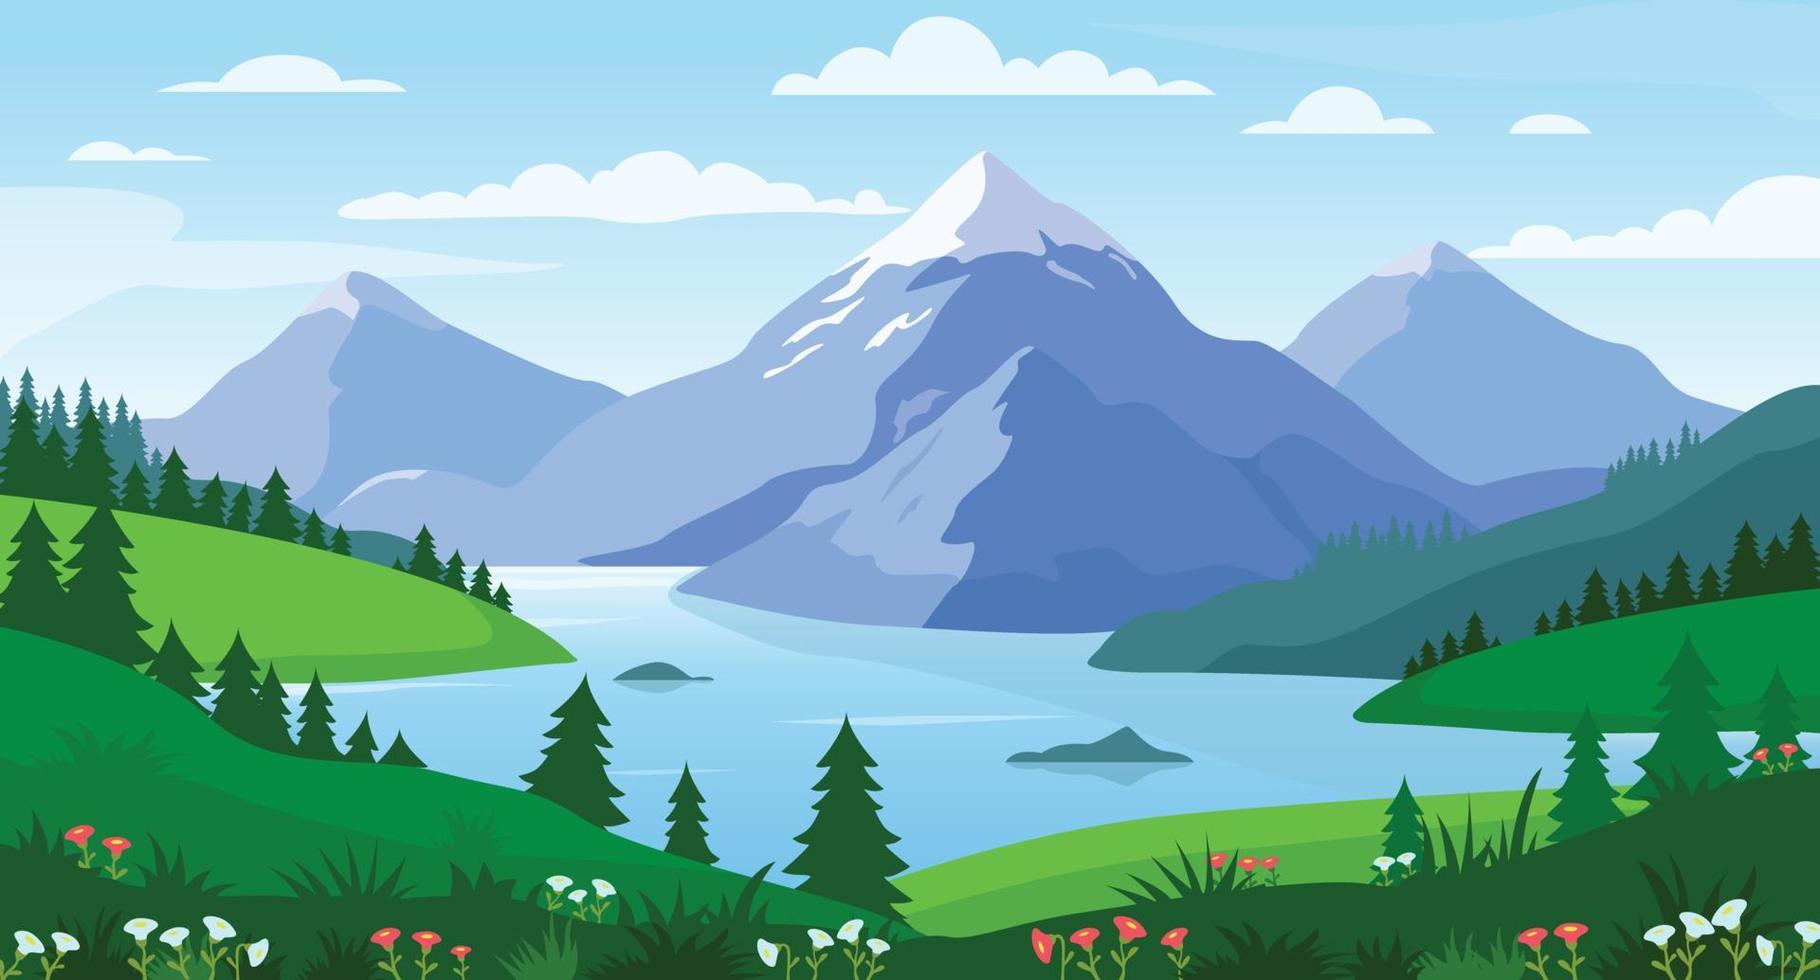 Mountain lake landscape vector illustration. Panorama of spring summer beautiful nature, meadow with flowers, forest, scenic blue lake and mountains on horizon background.